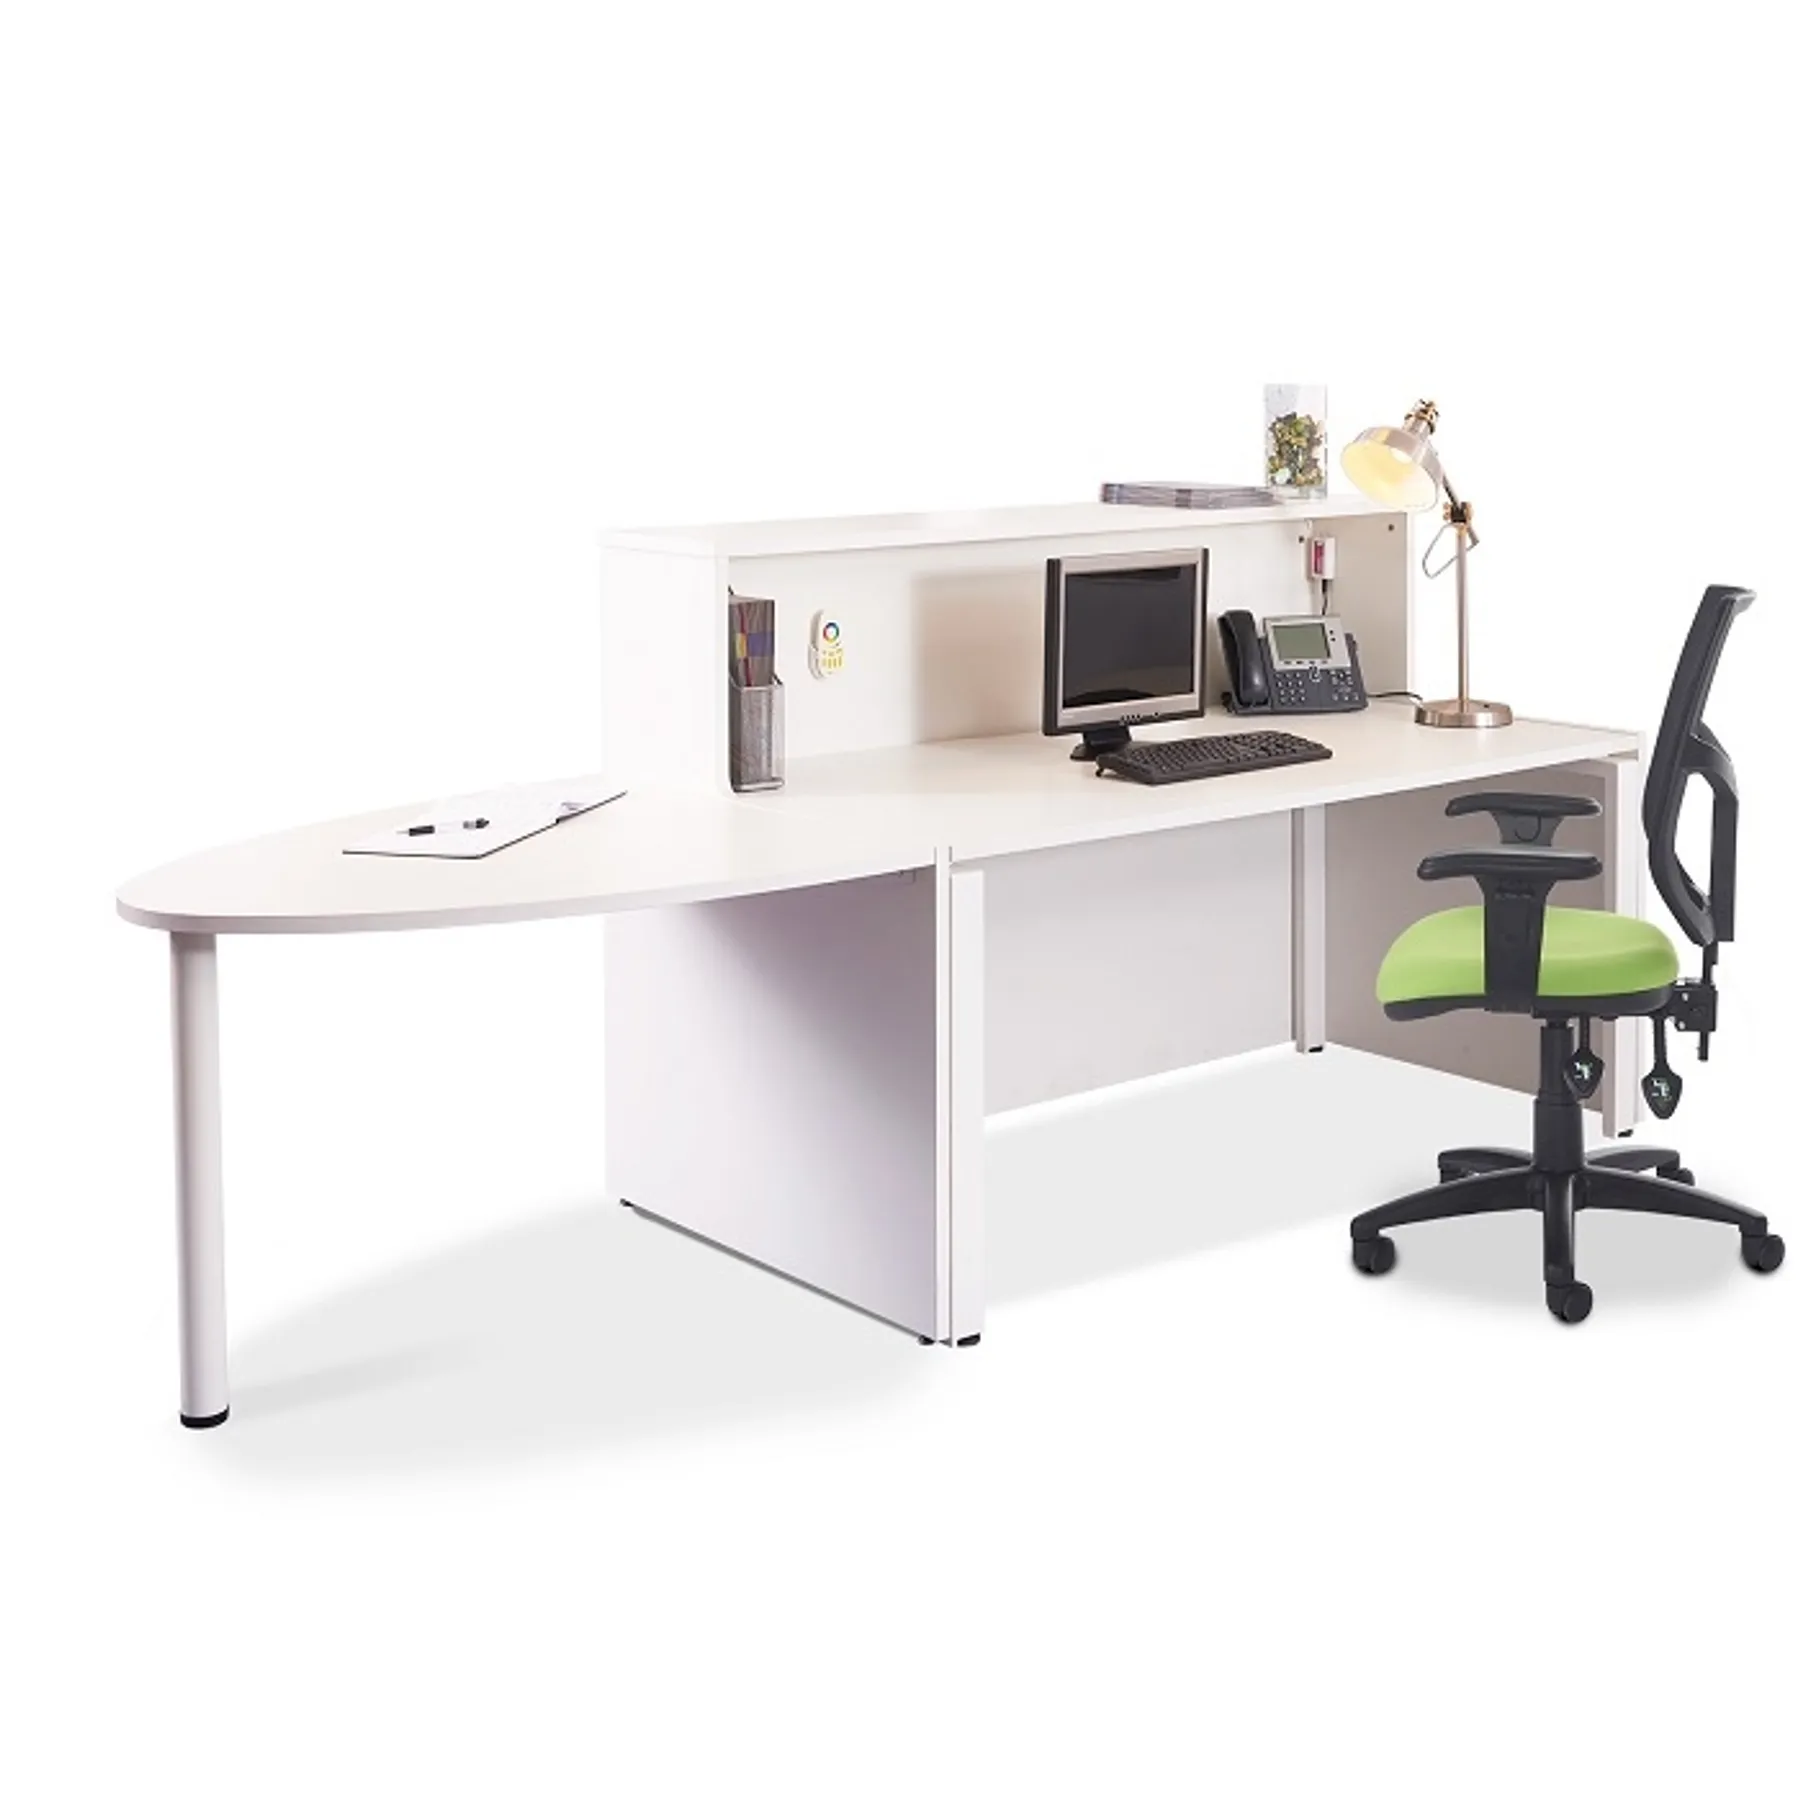 LOF Direct Dams Welcome Reception Desk White WRD14 WRD16 with accessories